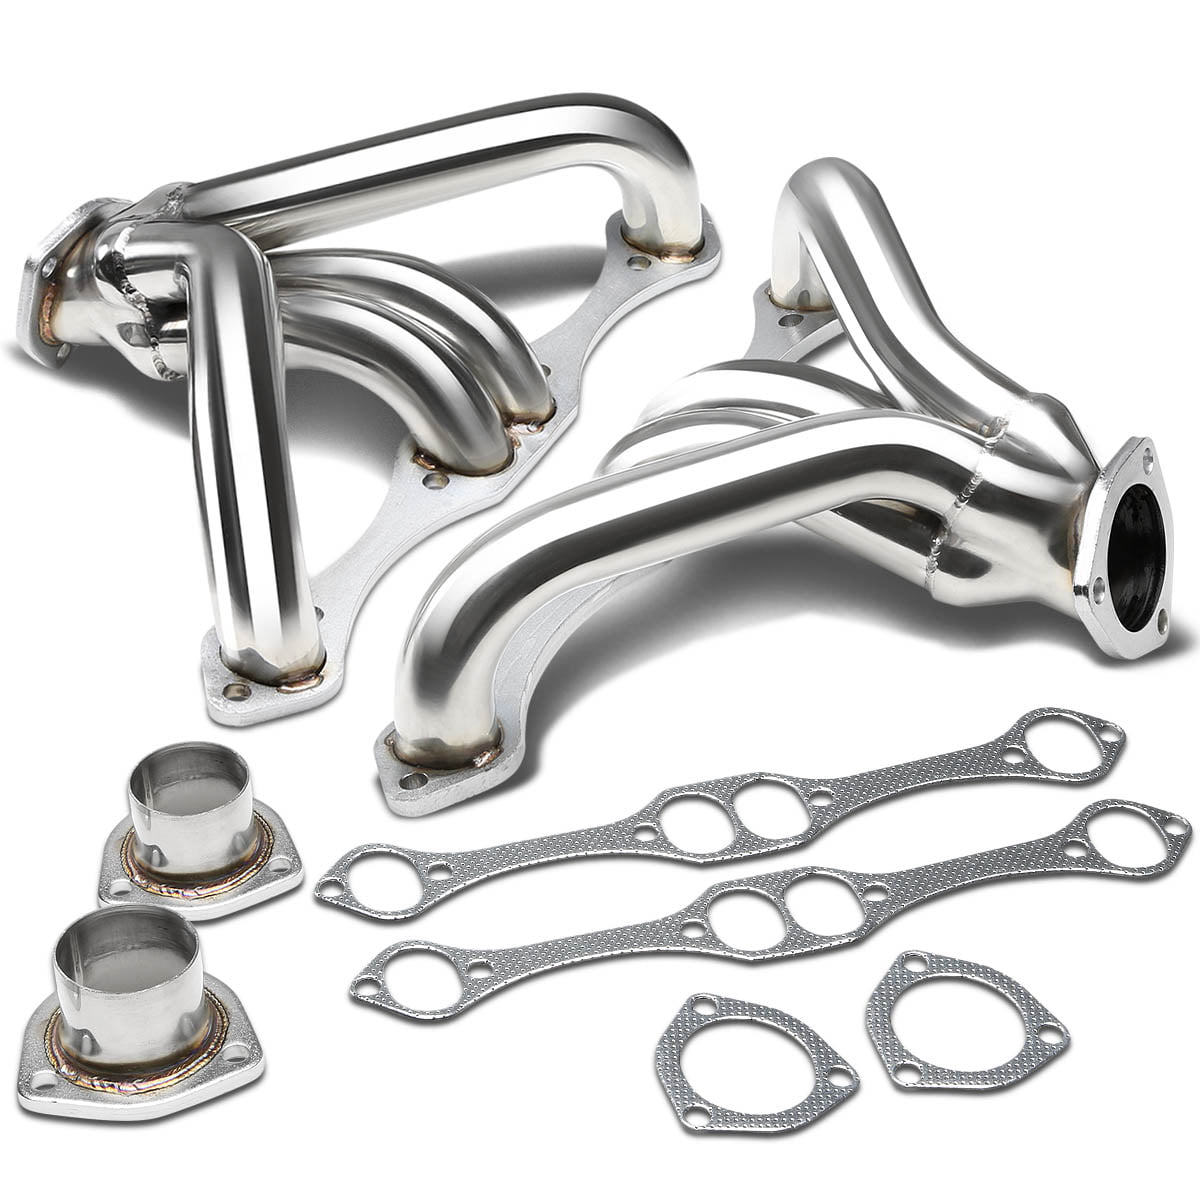 Stainless Steel Small Block Fits Chevy 1928-34 Chassis Headers